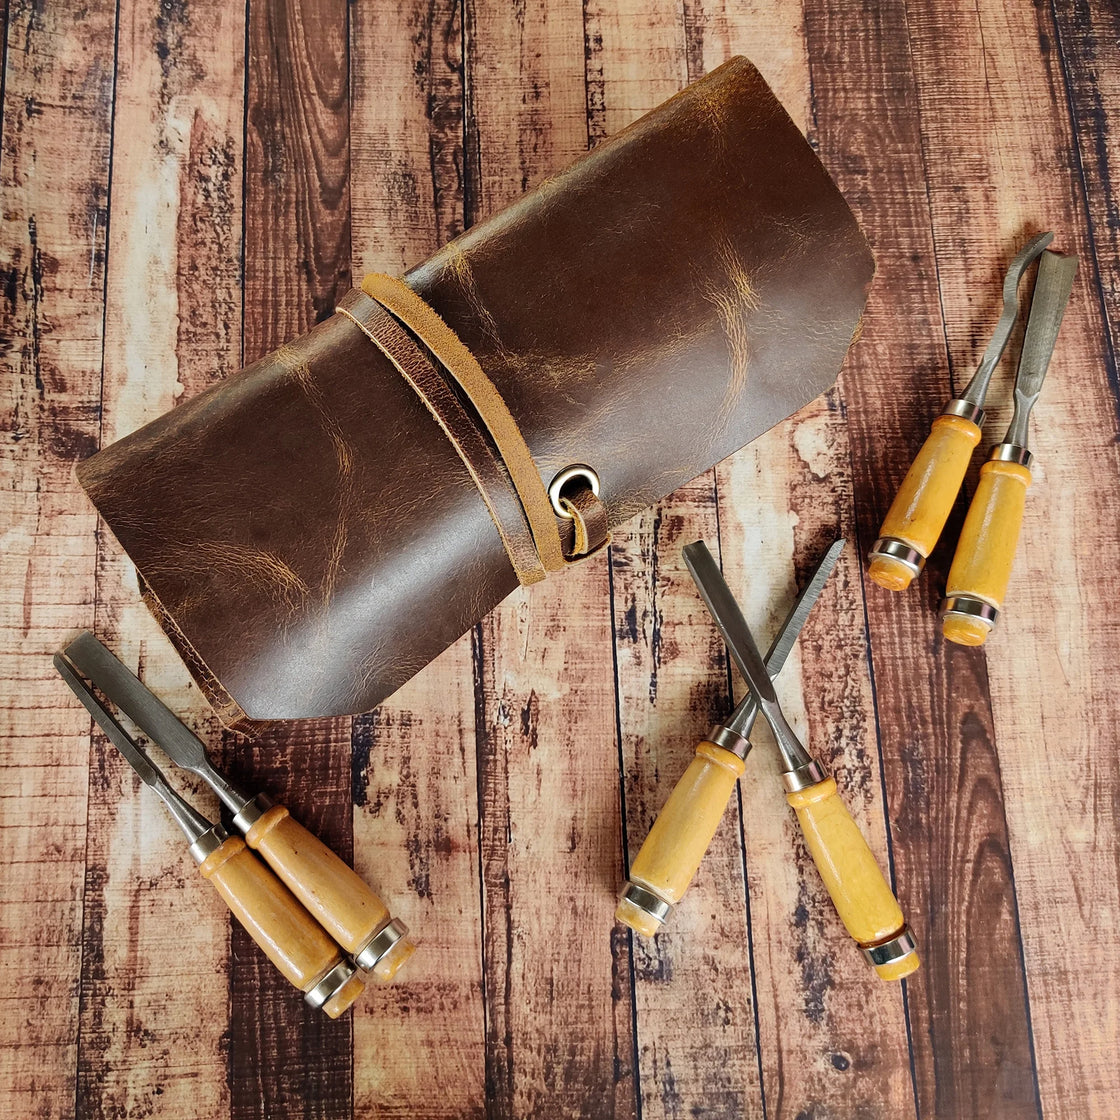 Full Grain Leather Tool Roll Up Pouch- Handcrafted Tool Kit (12 Slots)